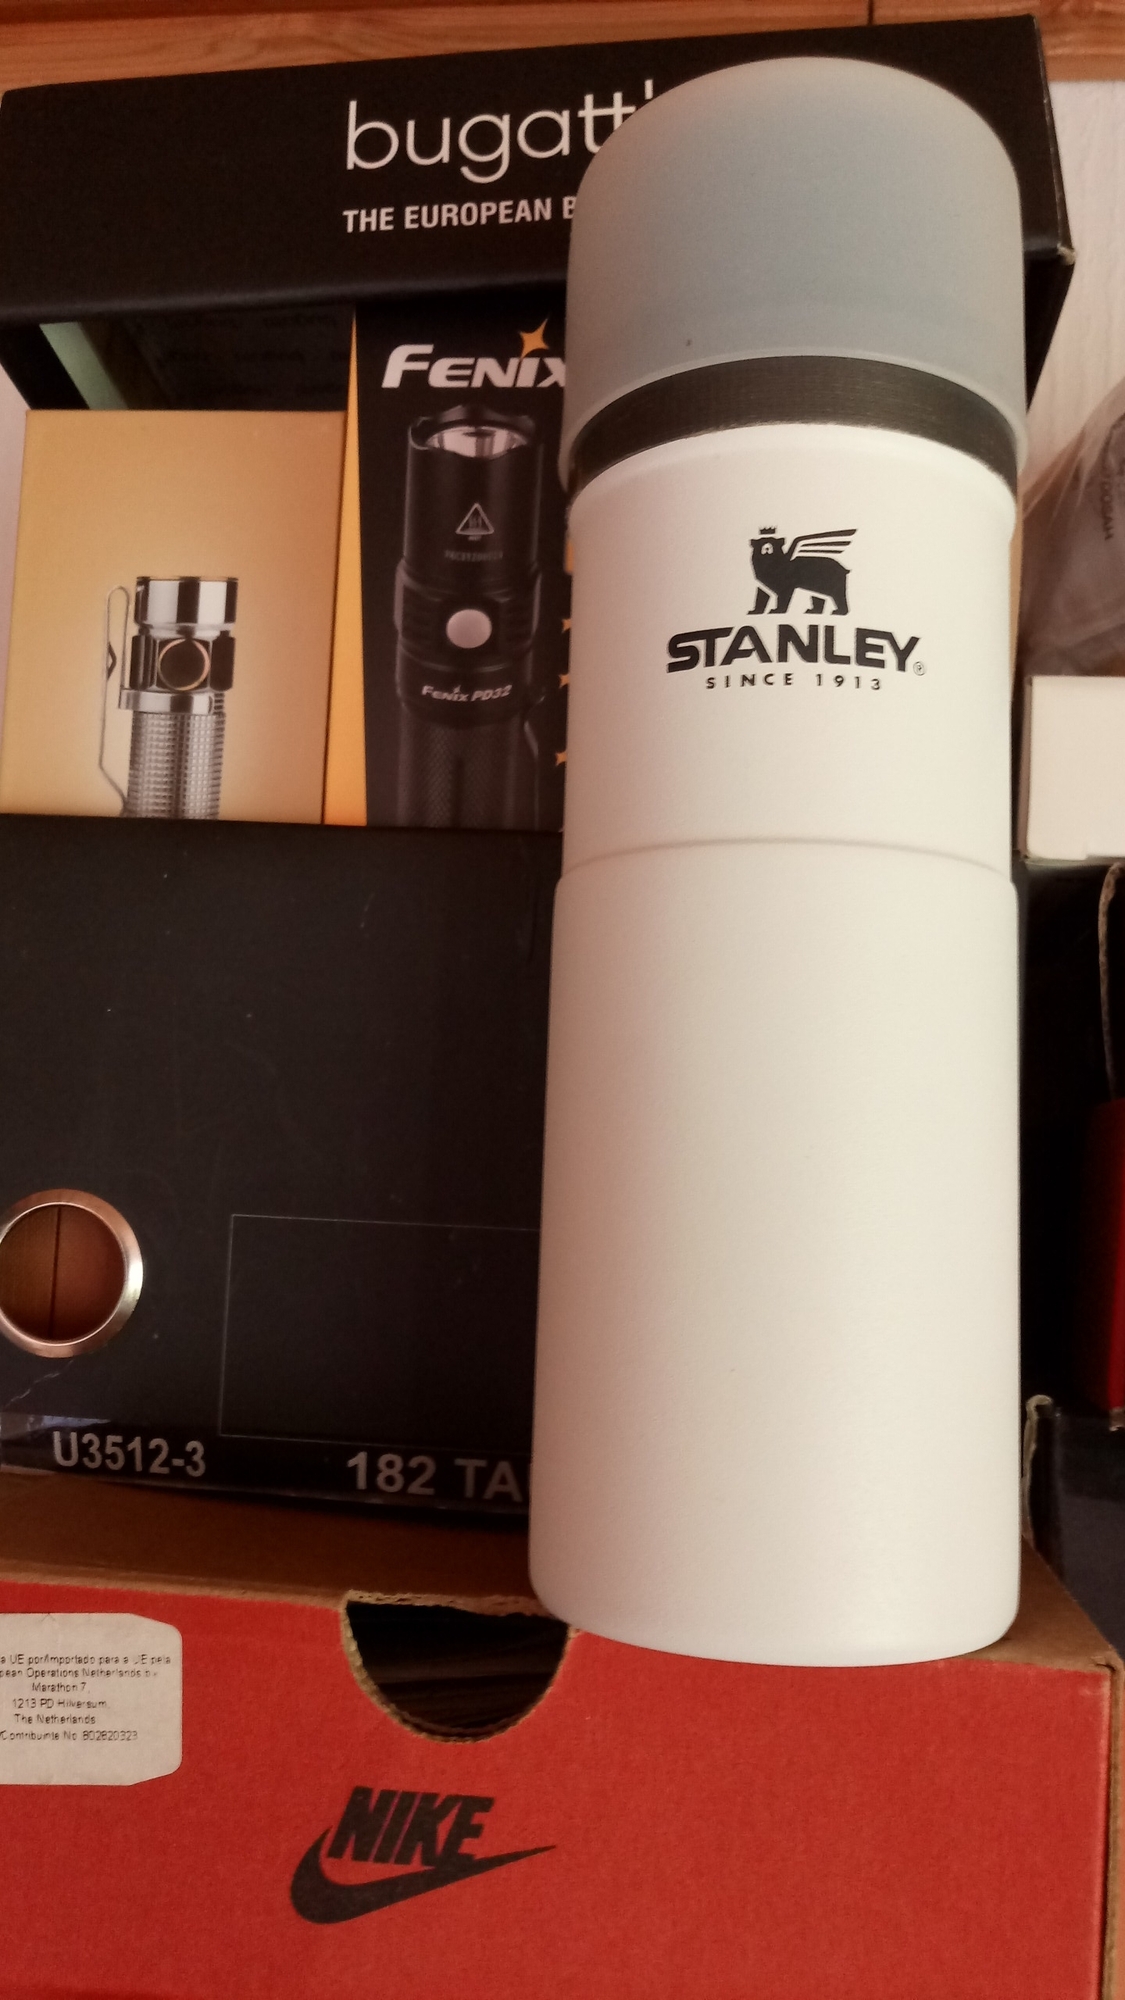 Stanley 0.7L GO Ceramivac ™ Bottle - Steel Thermos with Ceramic Inner  Surface